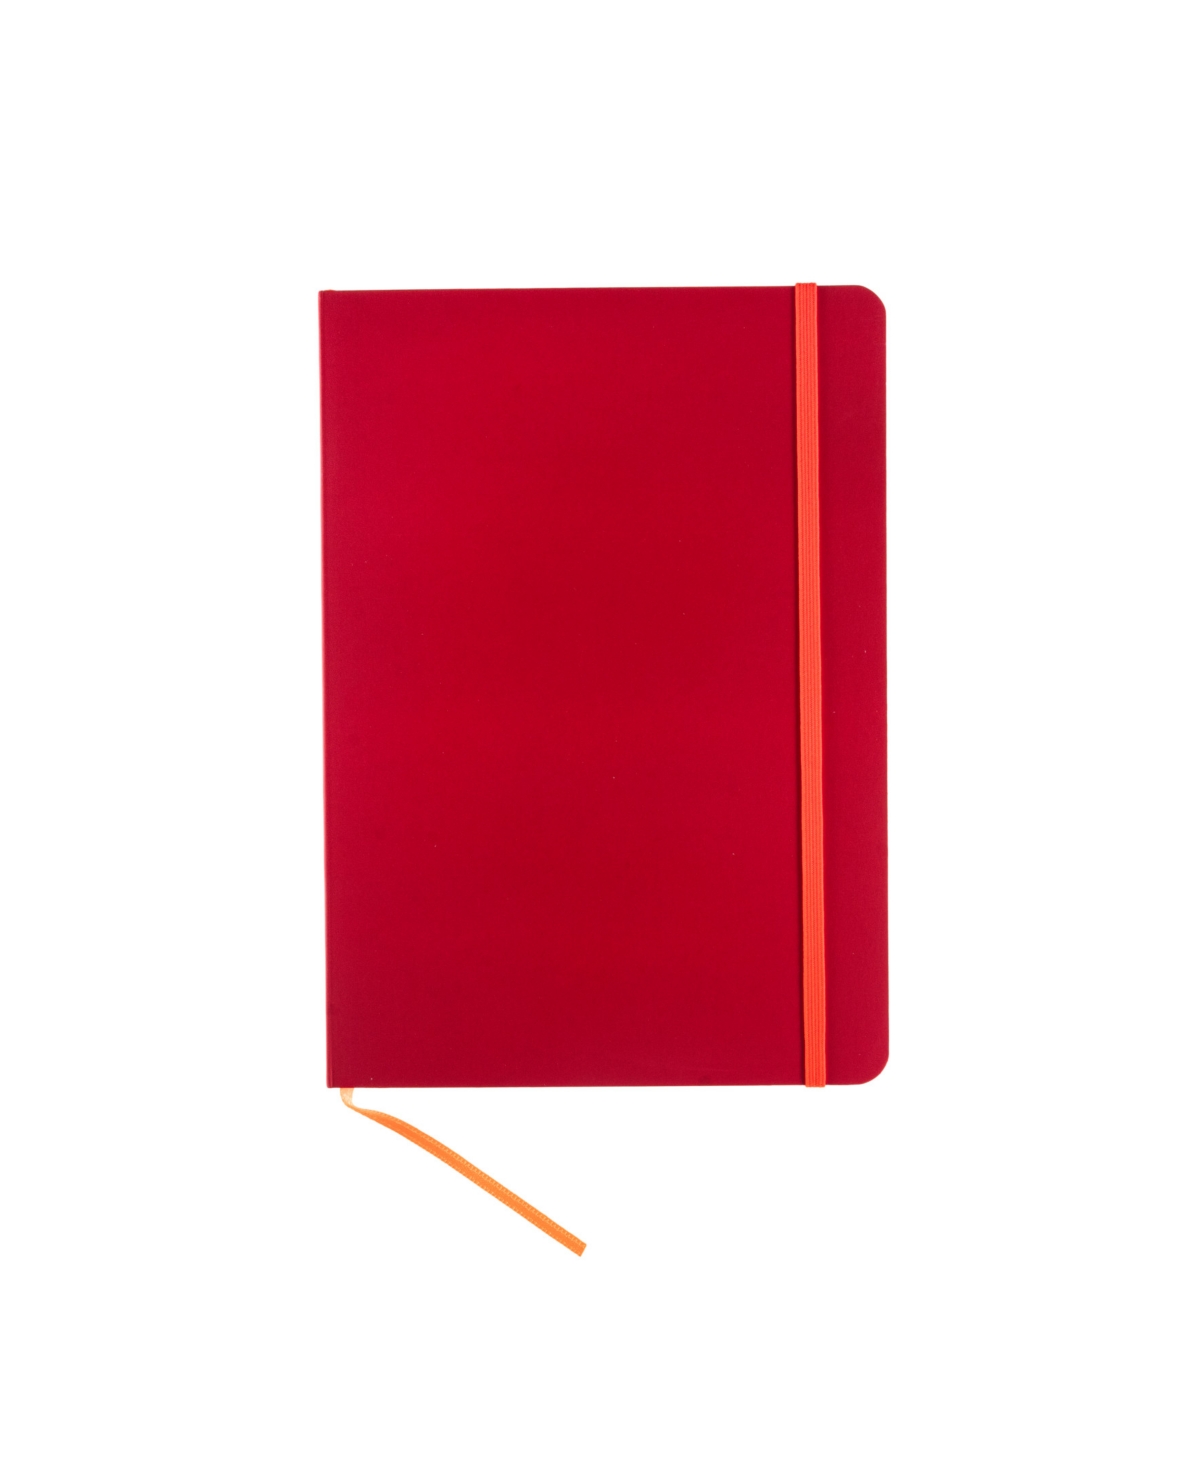 Ispira Soft Cover Dotted A5 Notebook, 5.8" x 8.3" - Red